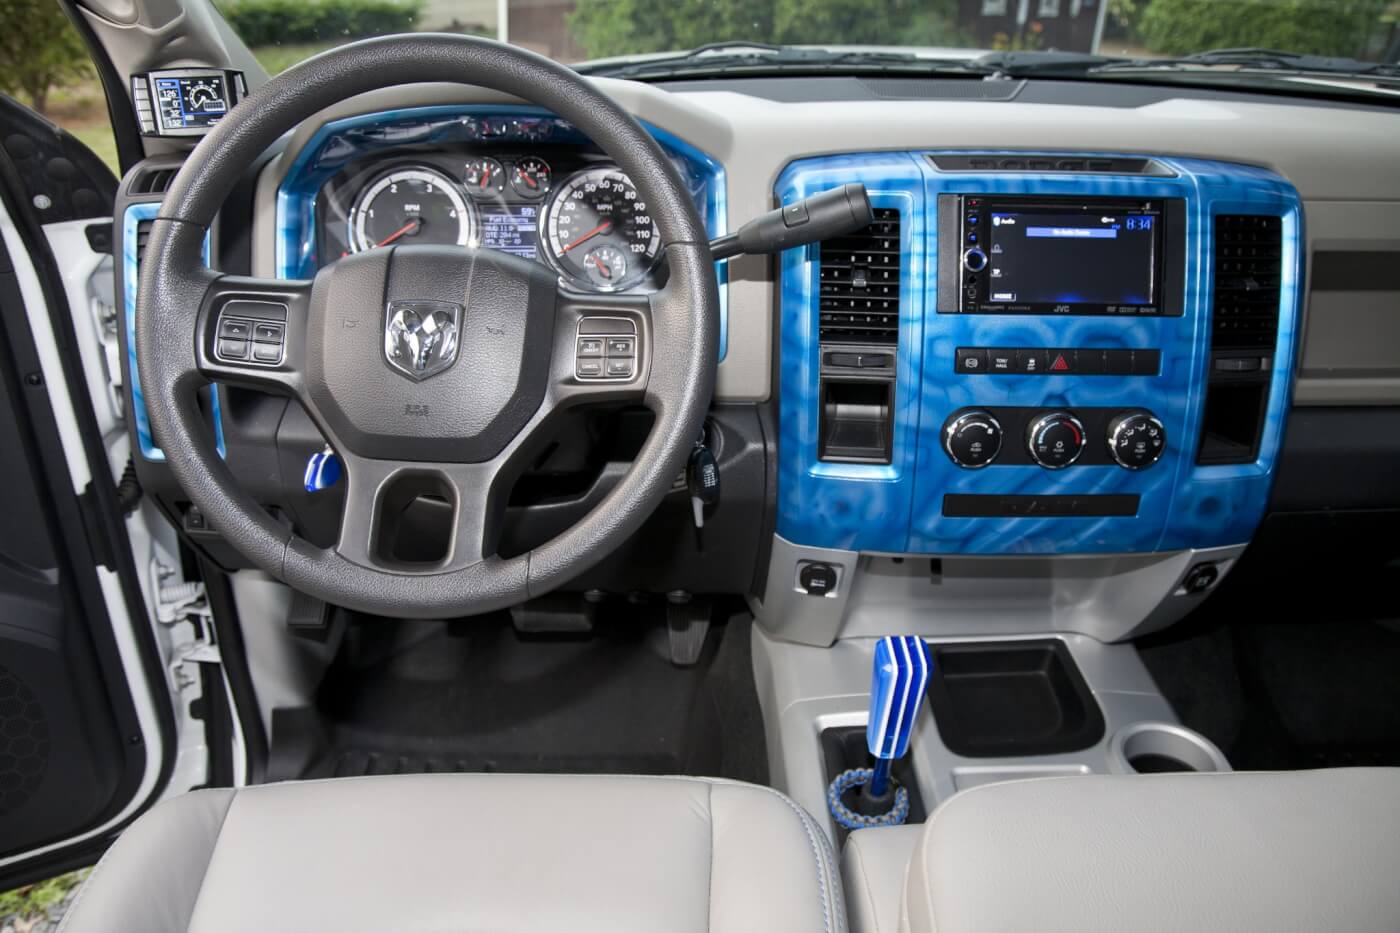 The interior of his truck, BIO Ram, is spiced up with blue accent pieces and fabric styled by Katzkin.